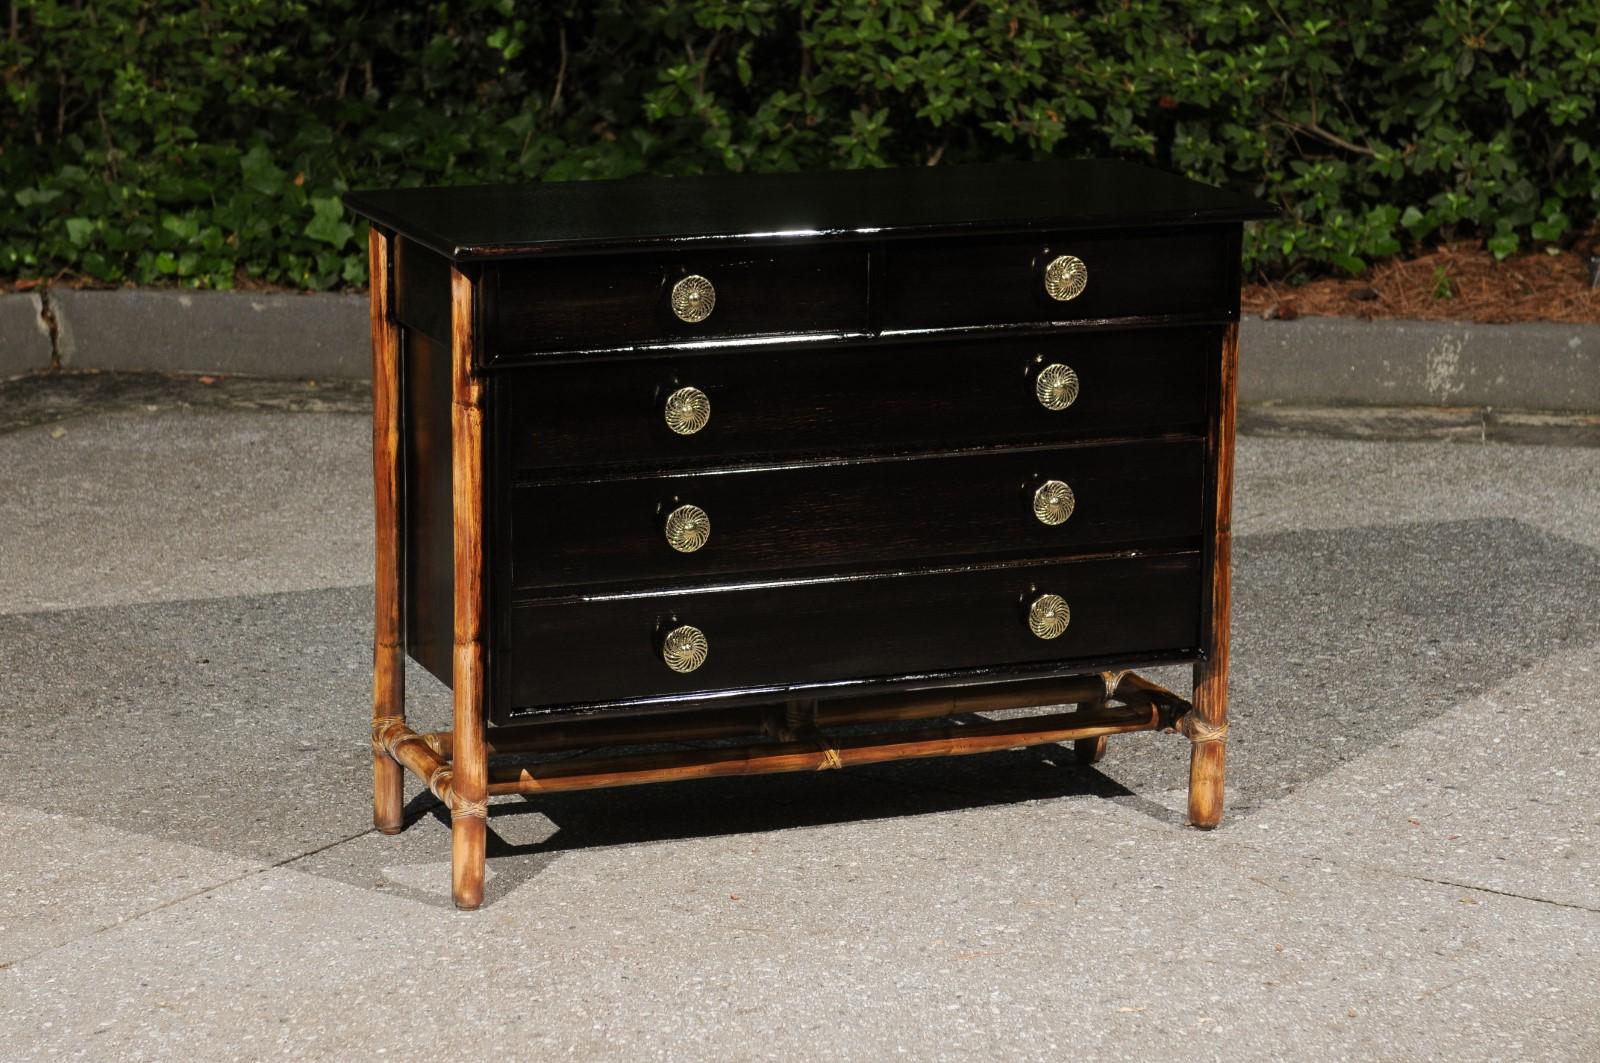 This magnificent commode is shipped as professionally photographed and described in the listing narrative: Meticulously professionally restored and completely installation ready.

A staggering restored example from an almost impossible to find